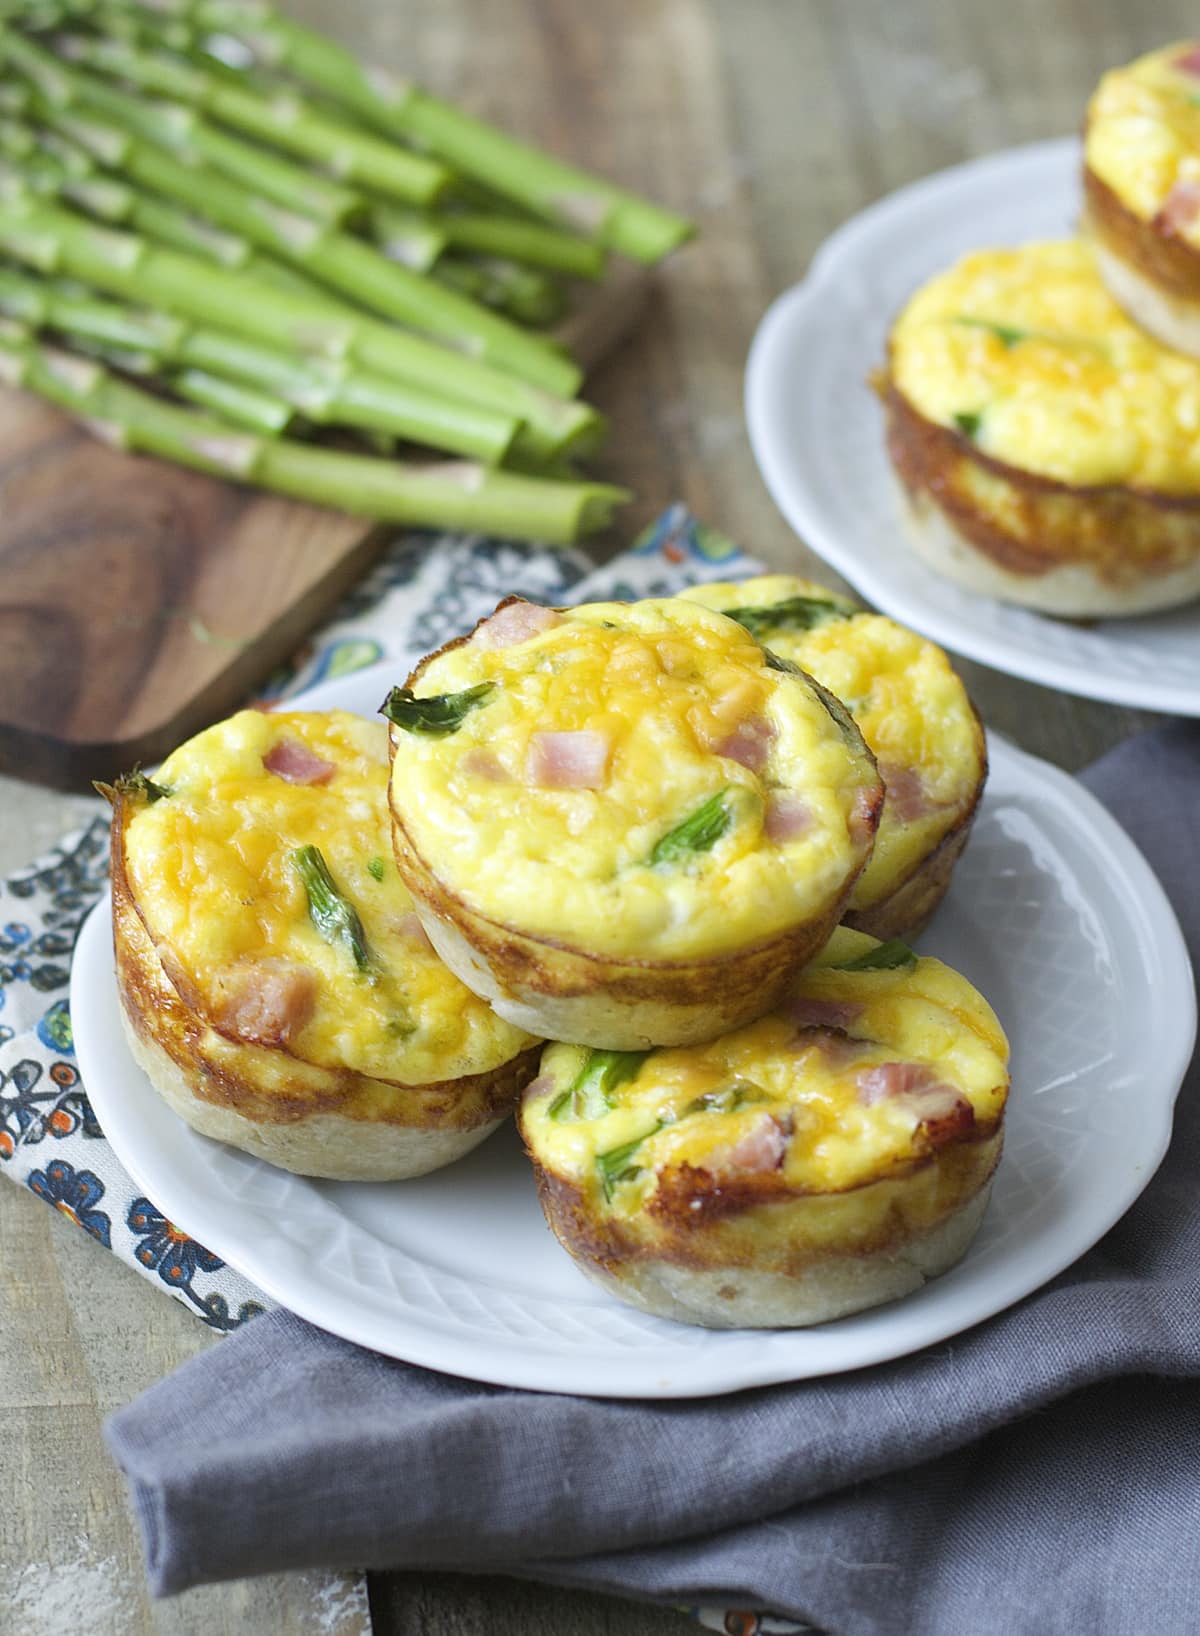 A stack of four ham and asparagus quiche on a white plate. Fresh asparagus spears rest in the background, along with another plate of mini quiche.